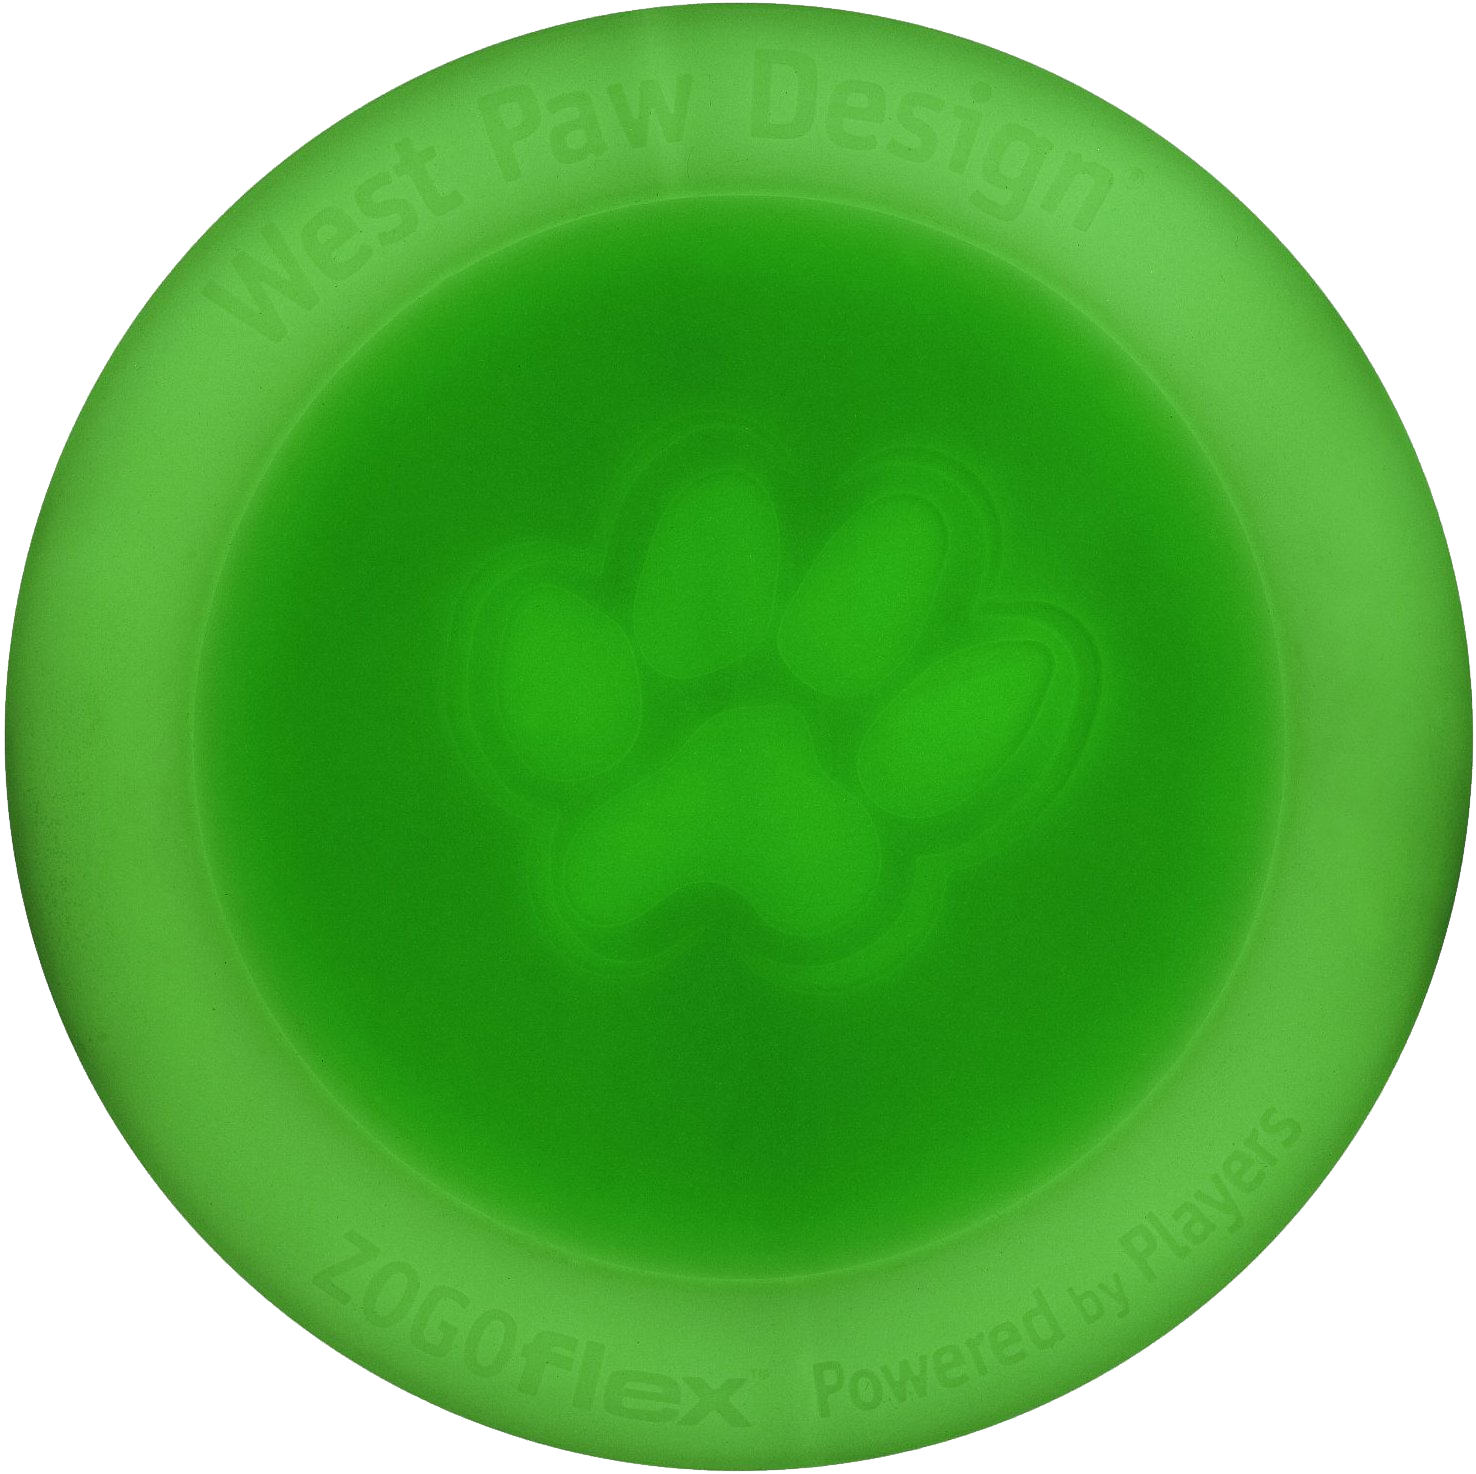 A Green Frisbee With A Paw Print